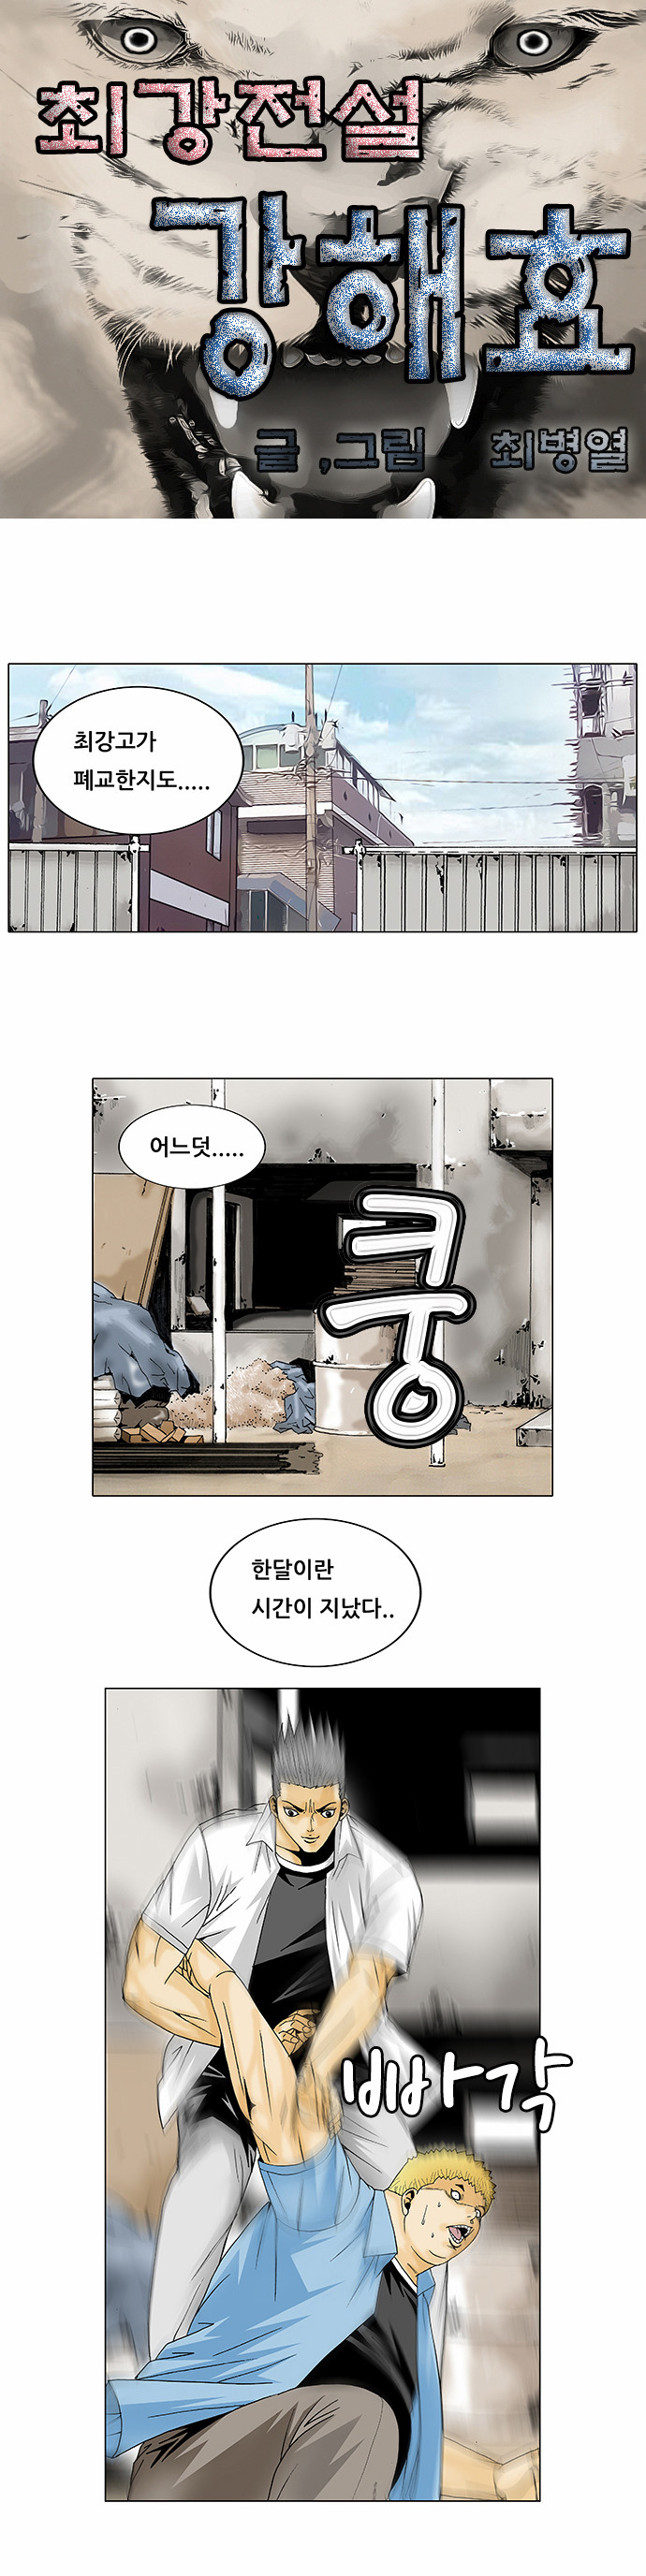 Ultimate Legend - Kang Hae Hyo - Chapter 114 - Page 3